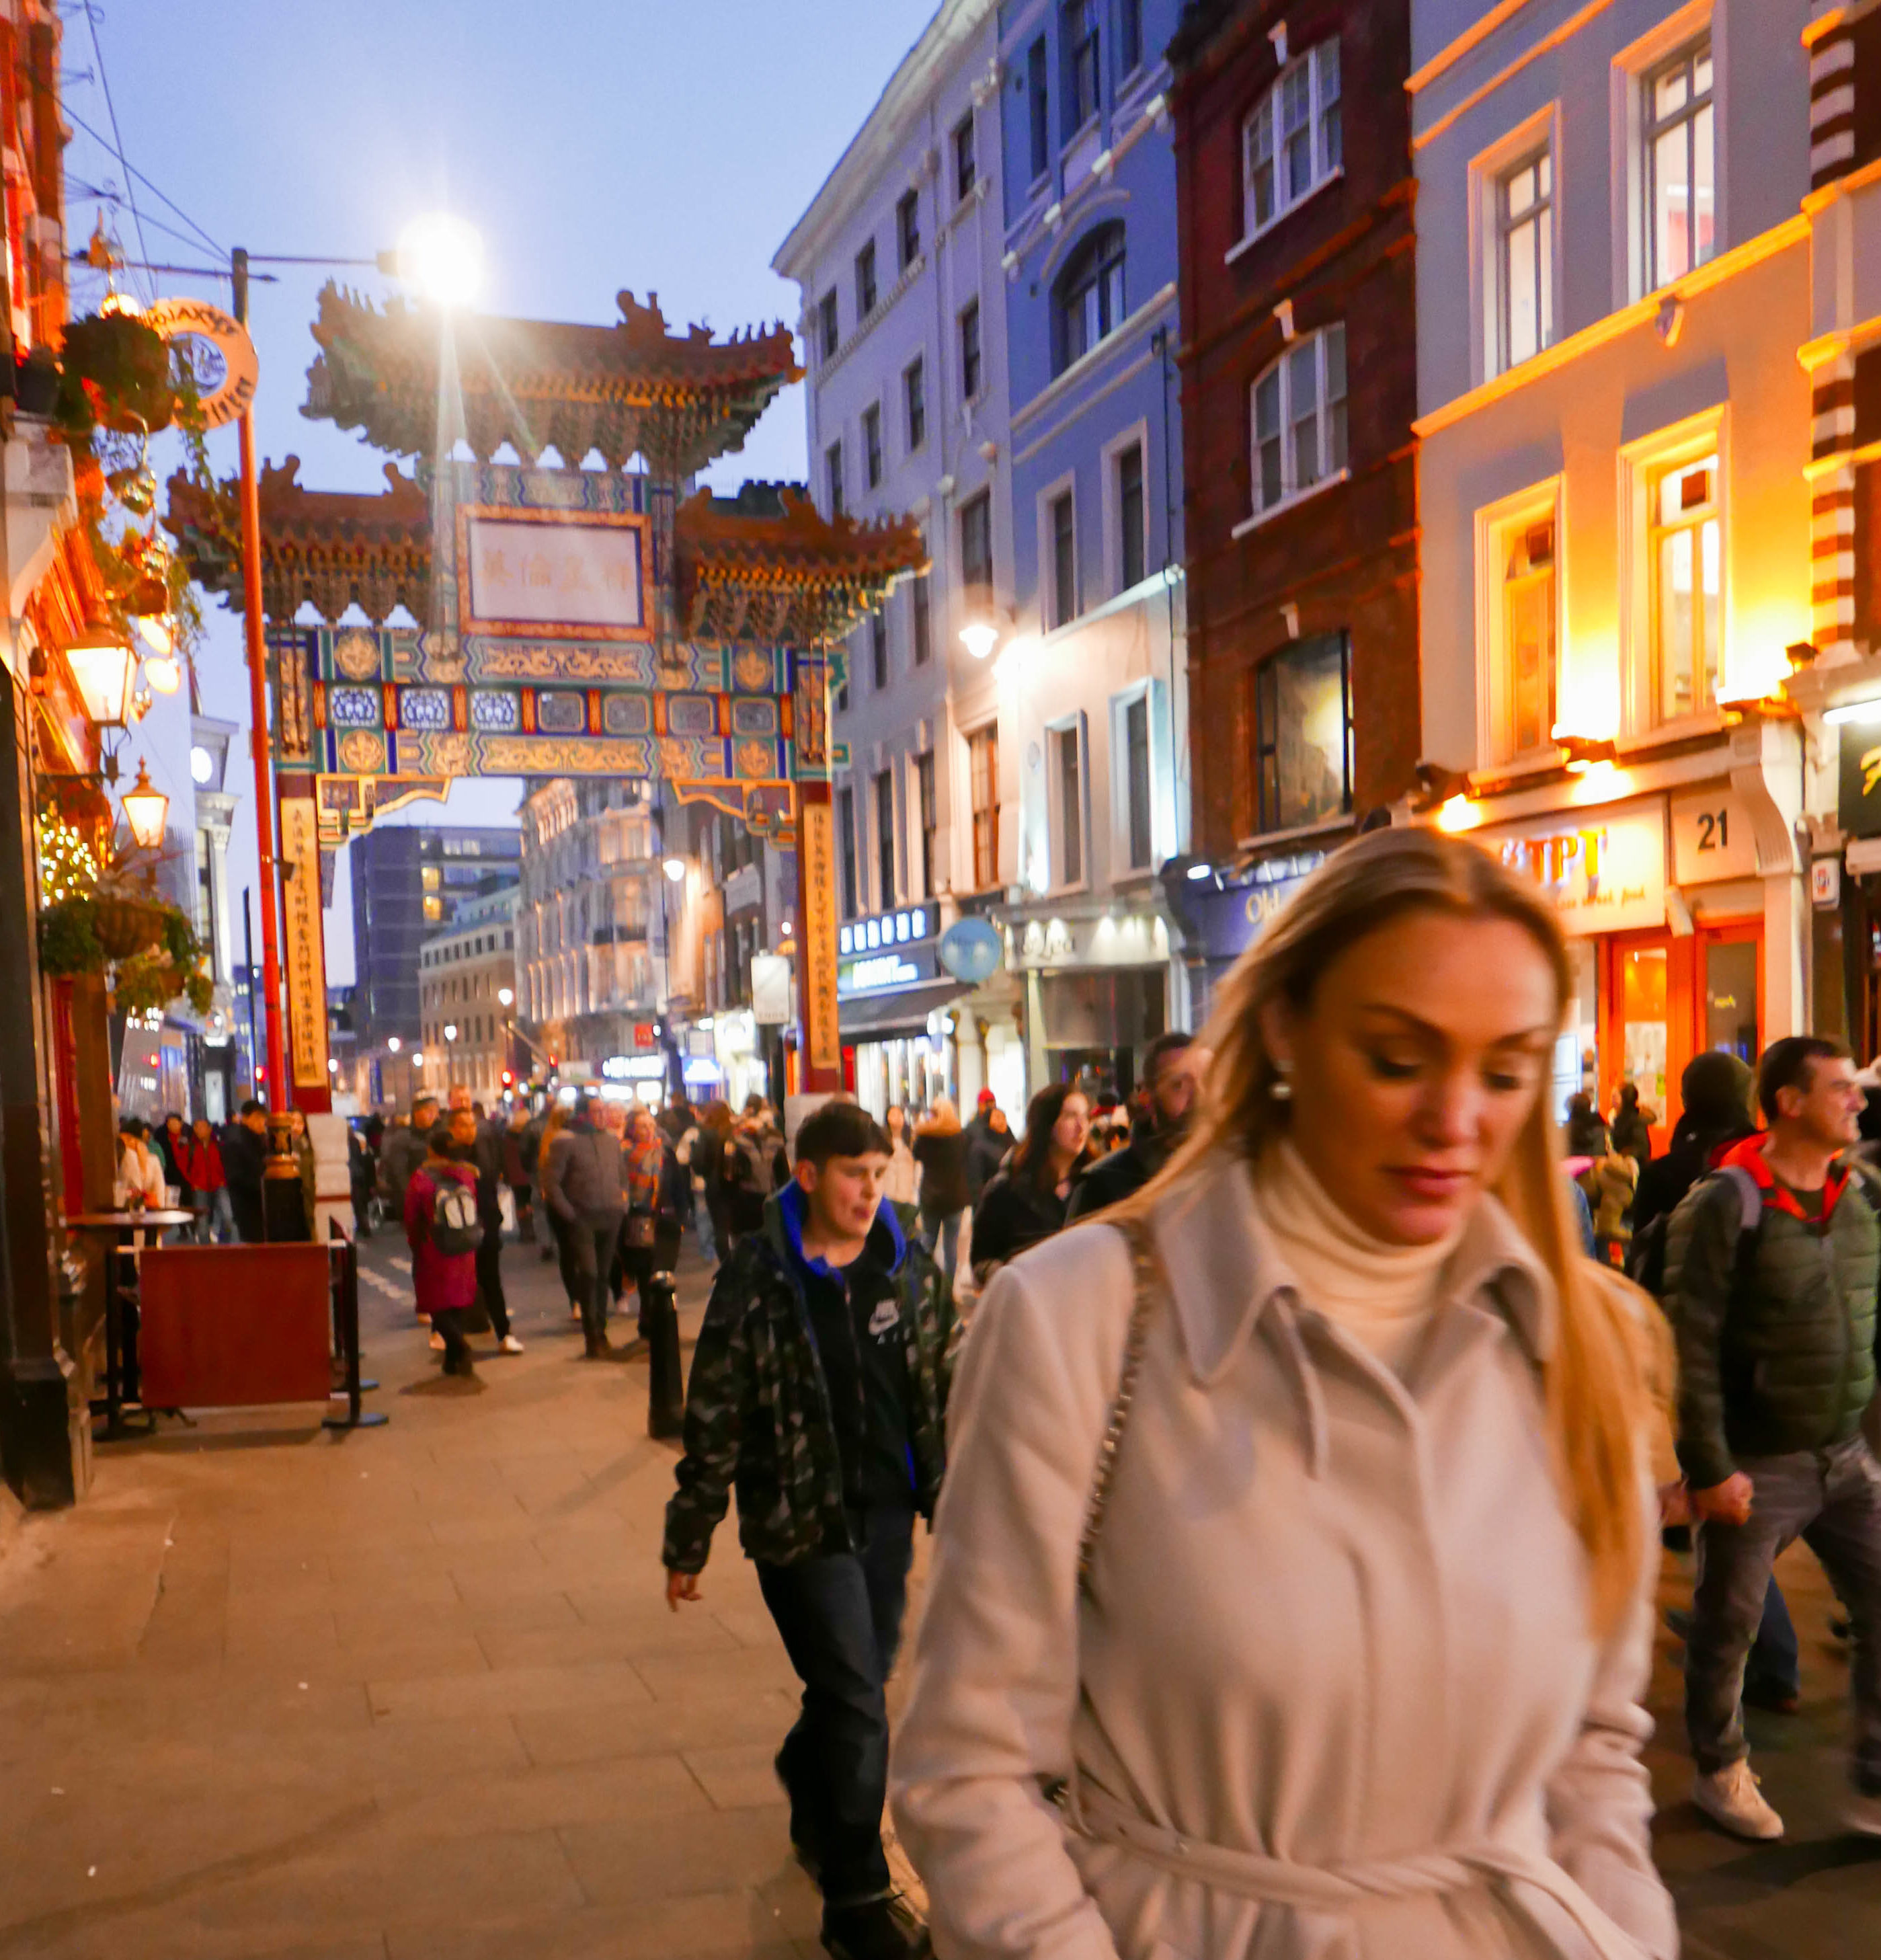 5 great places to eat in Chinatown